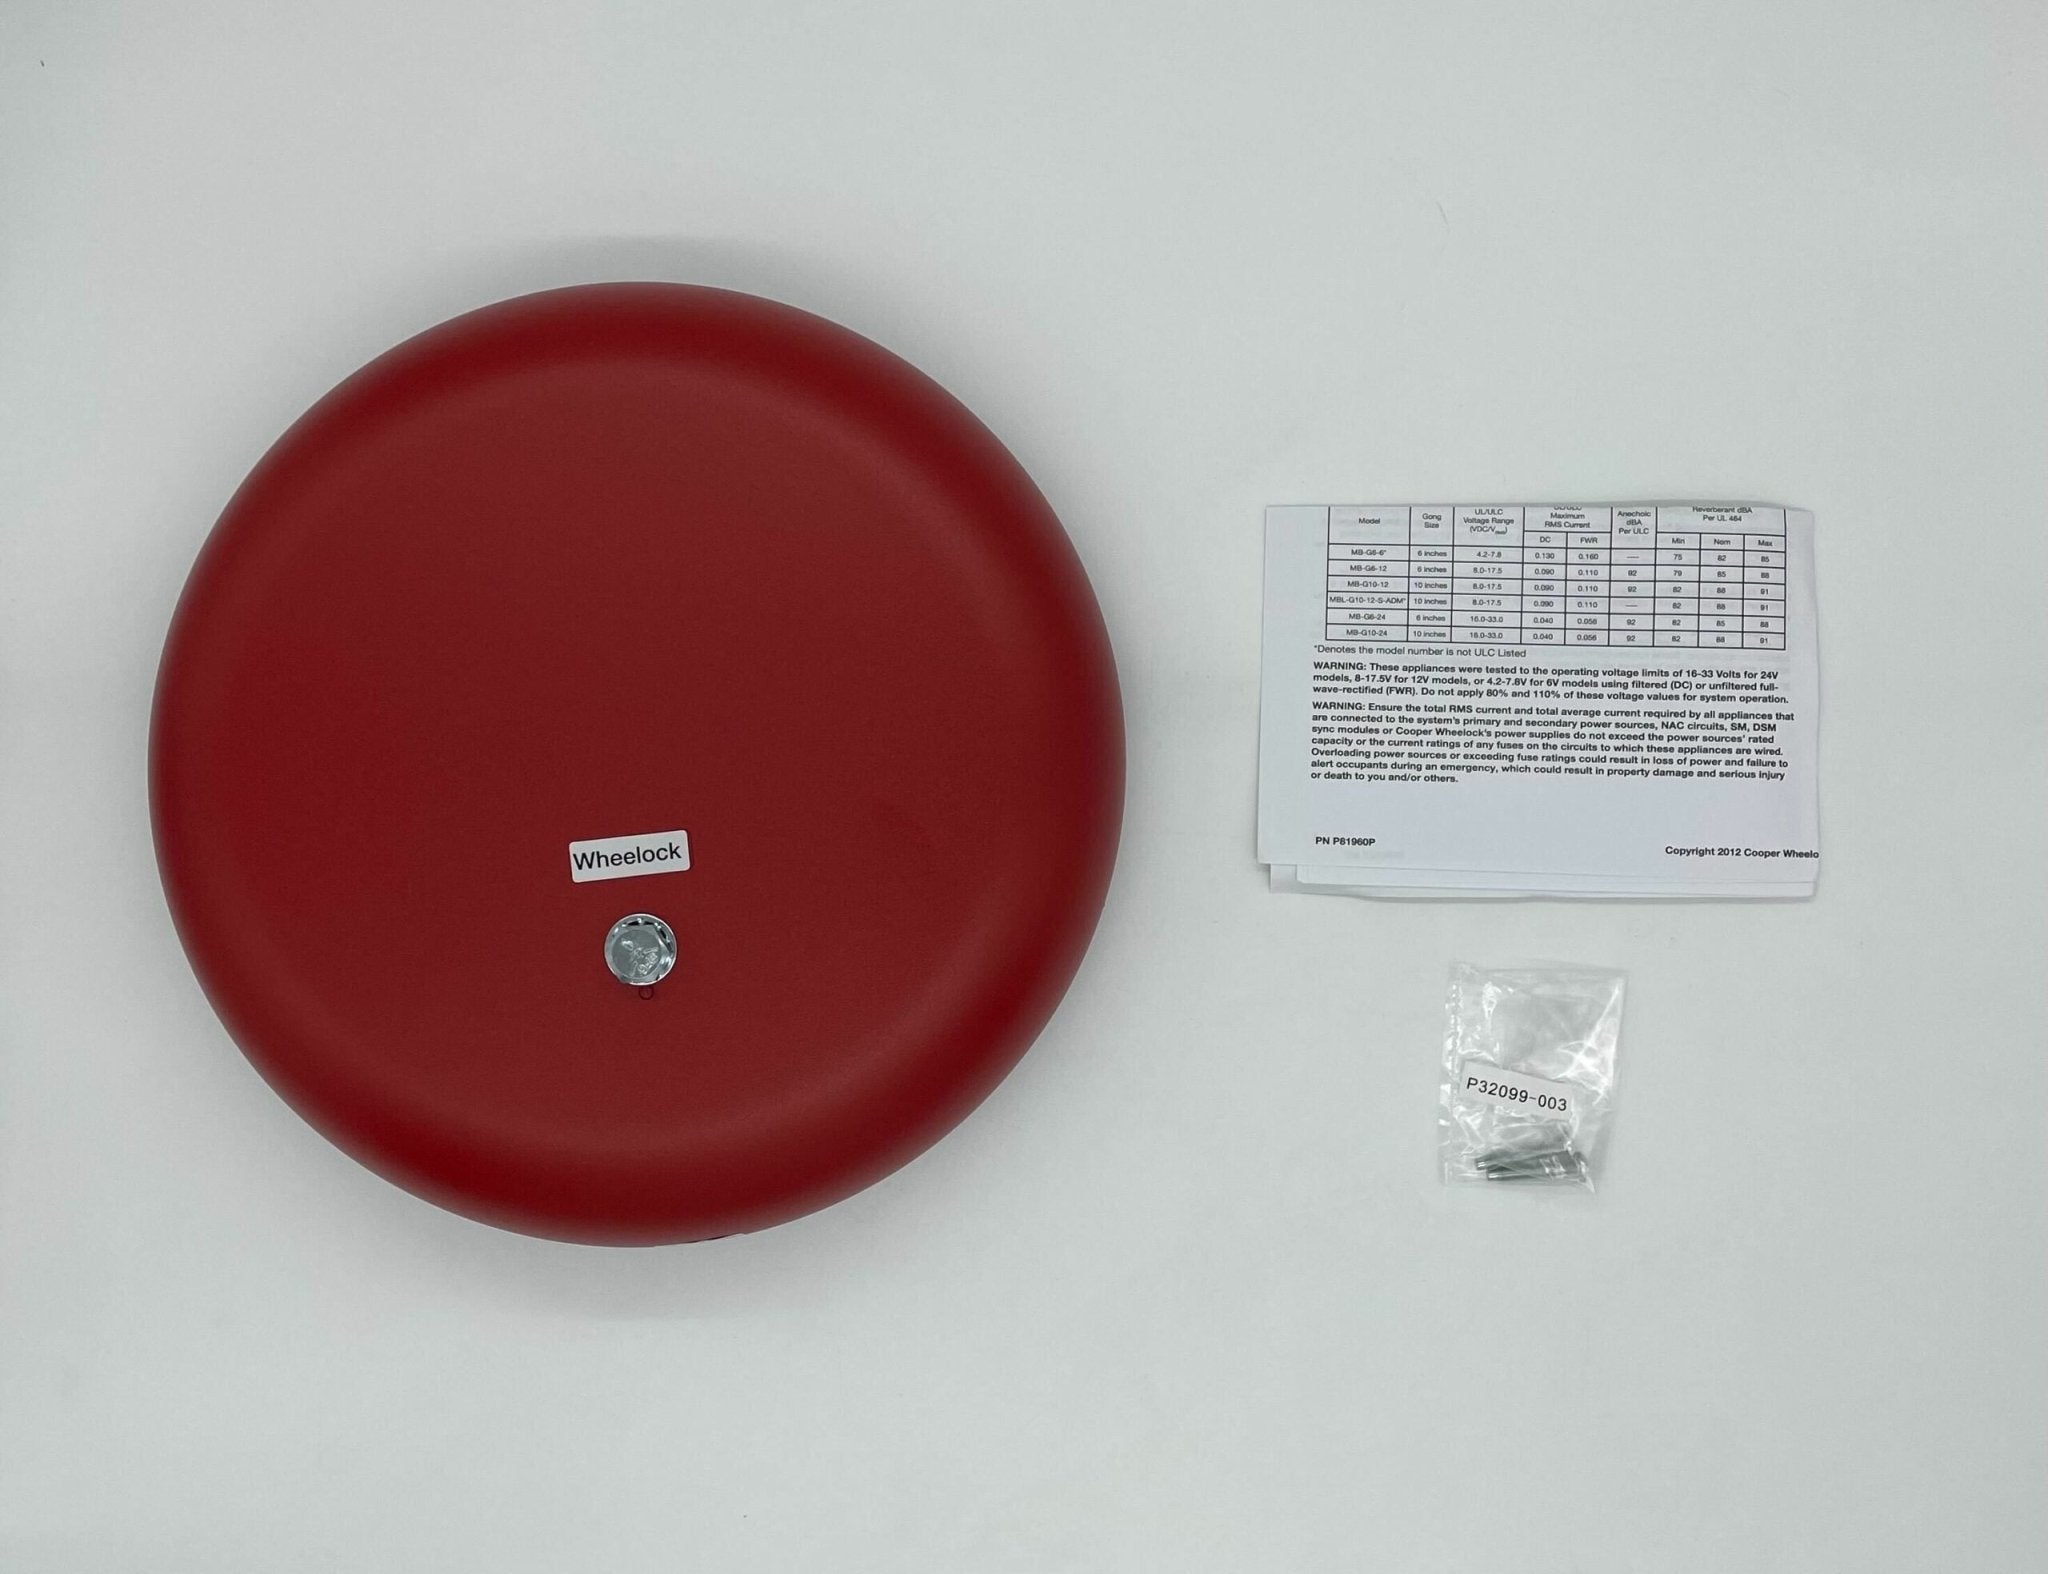 Wheelock MB-G10-24-R - The Fire Alarm Supplier